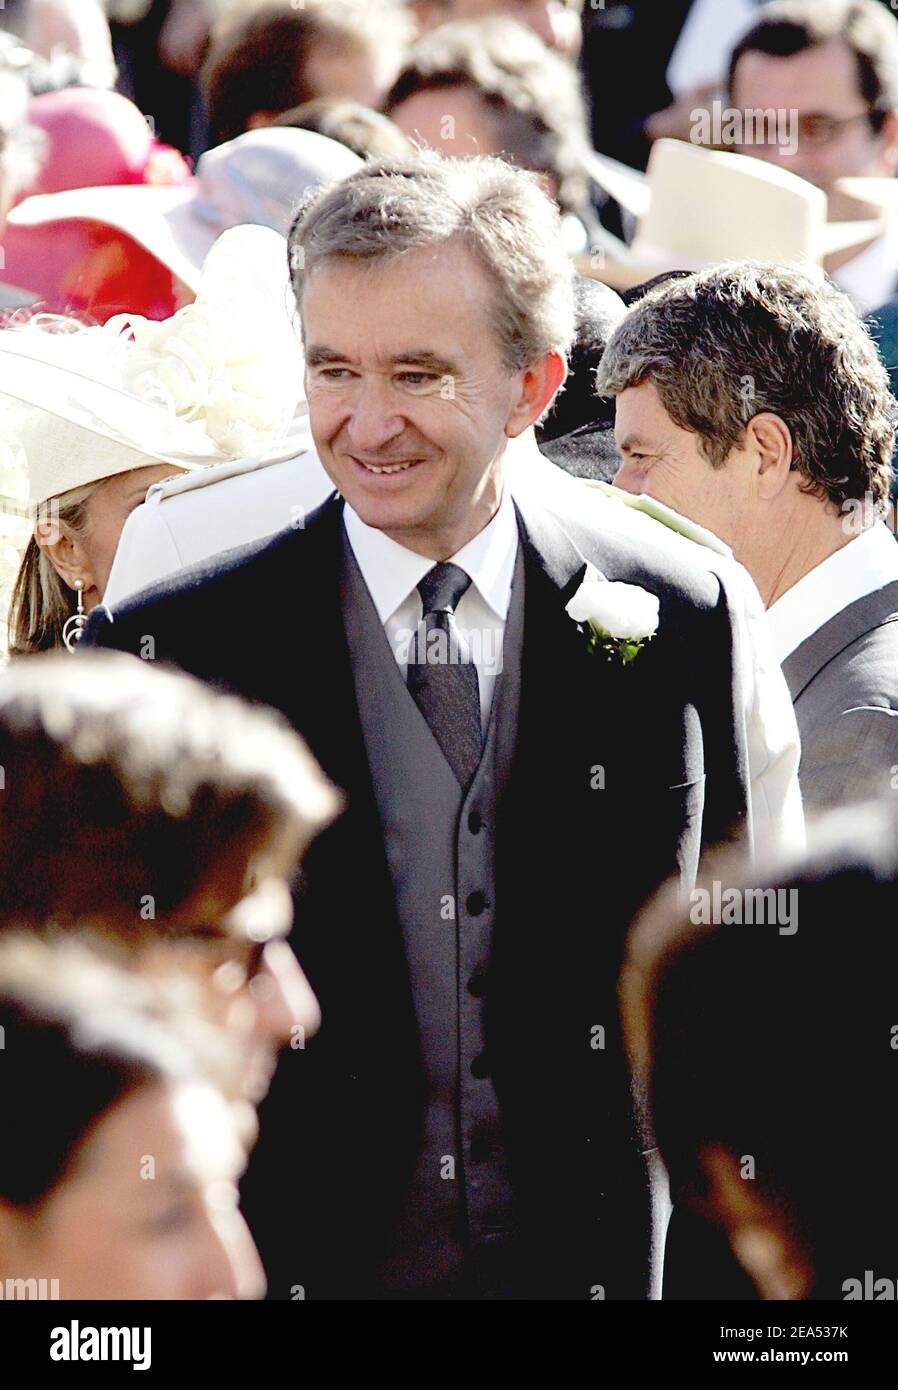 Bernard arnault delphine hi-res stock photography and images - Alamy